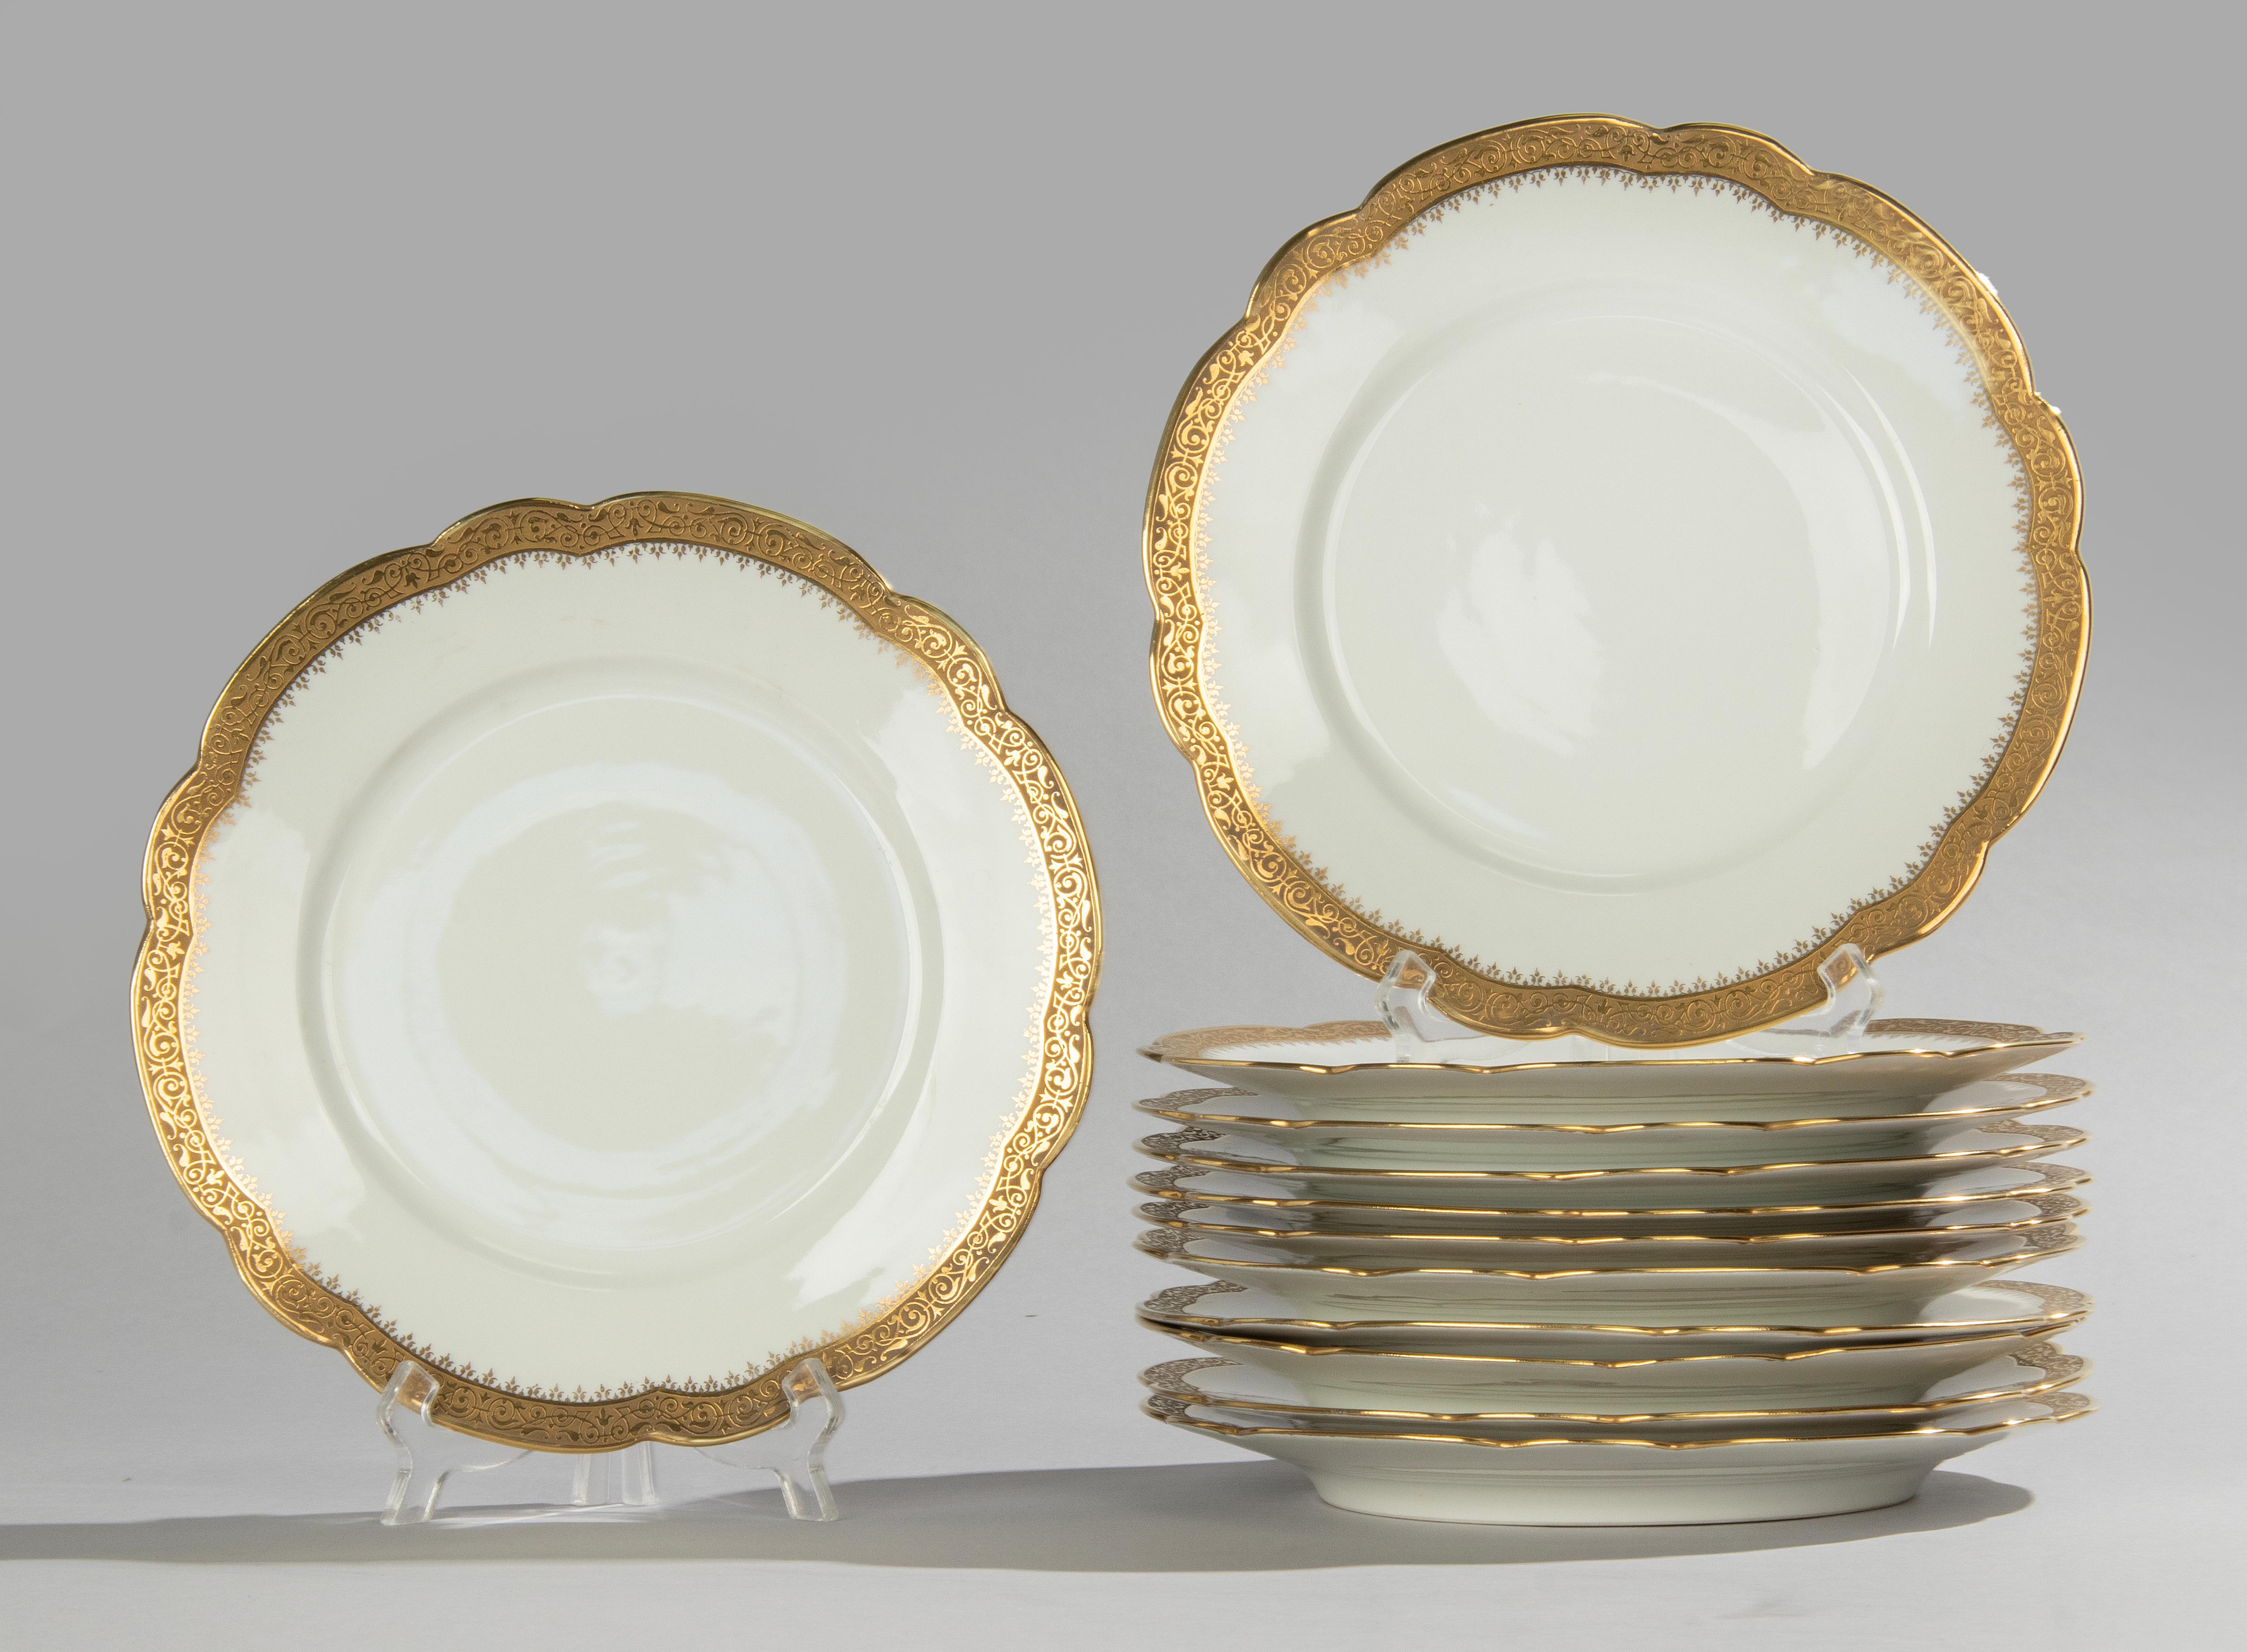 A beautiful set of 12 porcelain dinner plates, presumably from the French brand Limoges. 
The plates are beautifully decorated with inlaid gold edges.
The plates are all marked with a mark of A. Taillardat et Fils, Paris. This is the store where it